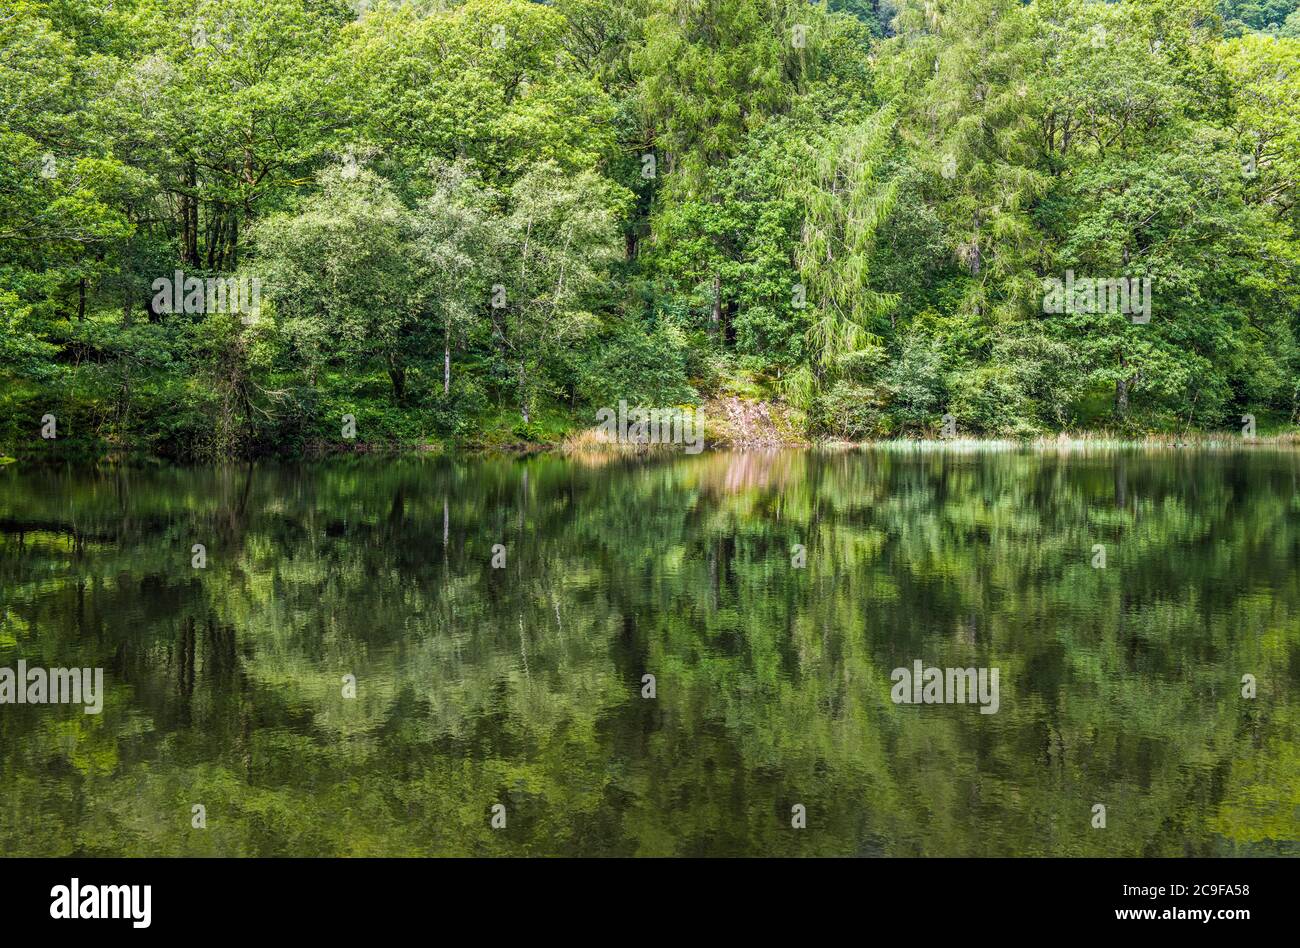 Yew Tree Tarn in the Lake District National Park with trees and their reflections showing vividly in the calm waters of the tarn. Stock Photo